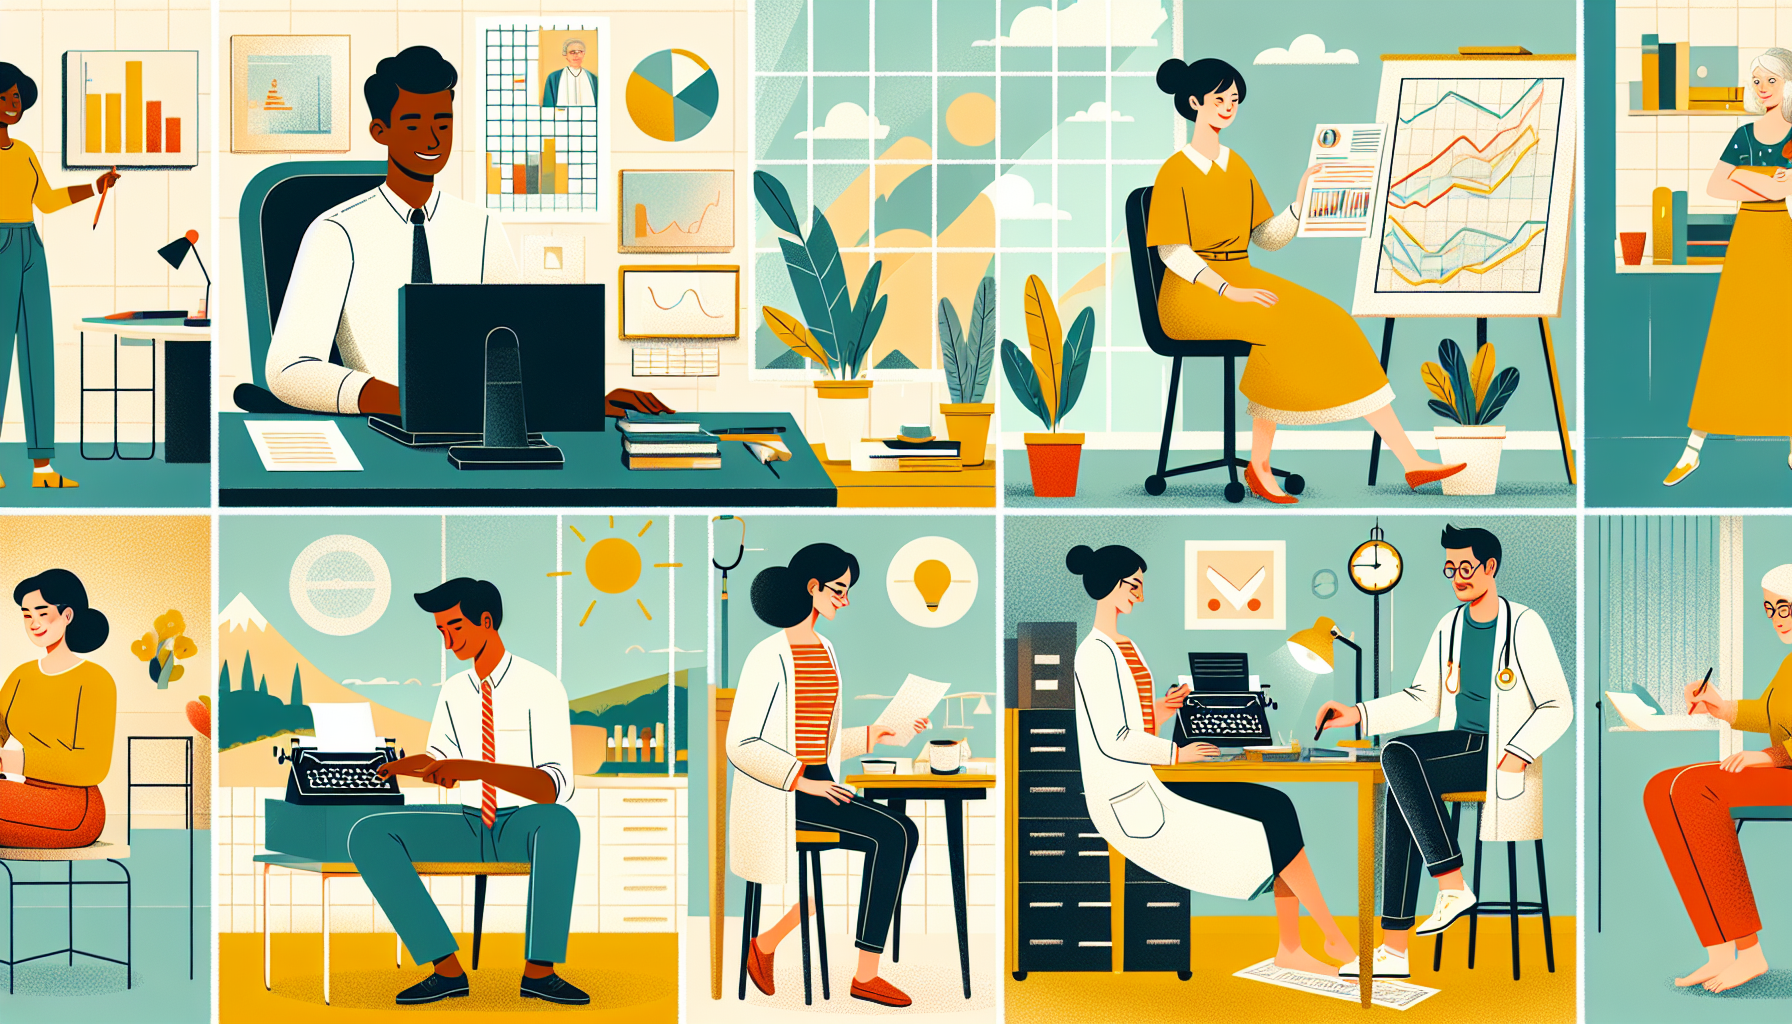 Create an illustration that features a diverse group of professionals in various high-paying, low-stress jobs. The scene should include a serene, modern office with workers collaborating happily, a tr